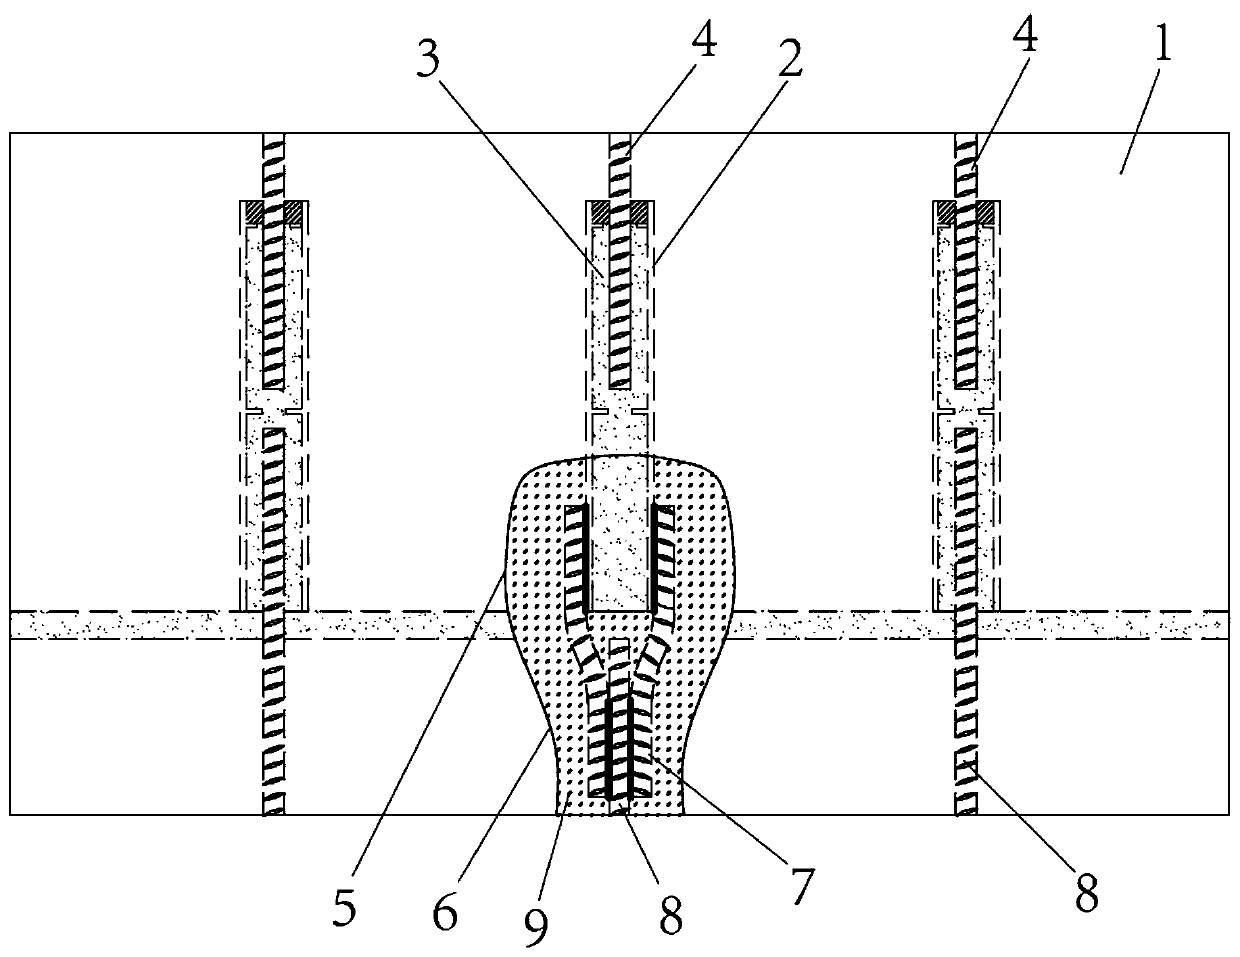 Reinforcing structure for truncation of connecting reinforcing steel bars in sleeves and construction method thereof